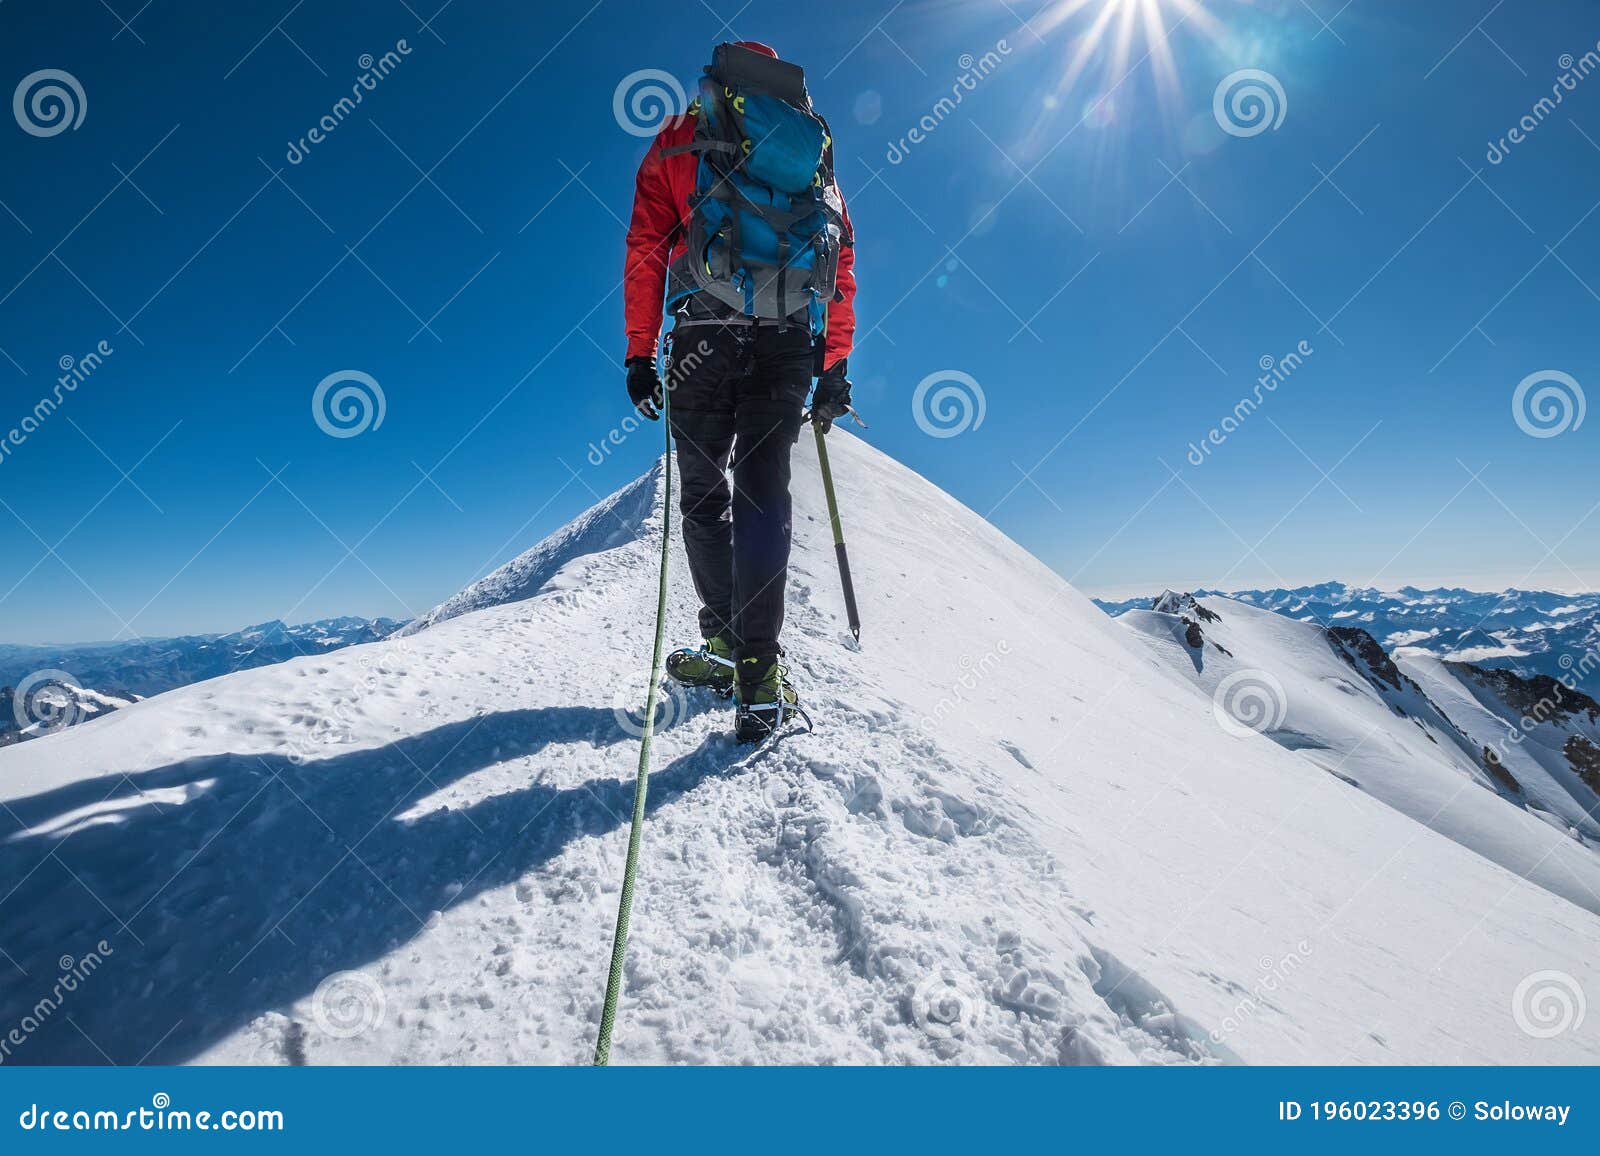 last steps before mont blanc monte bianco summit 4,808 m of man with climbing axe dressed mountaineering clothes, boots with